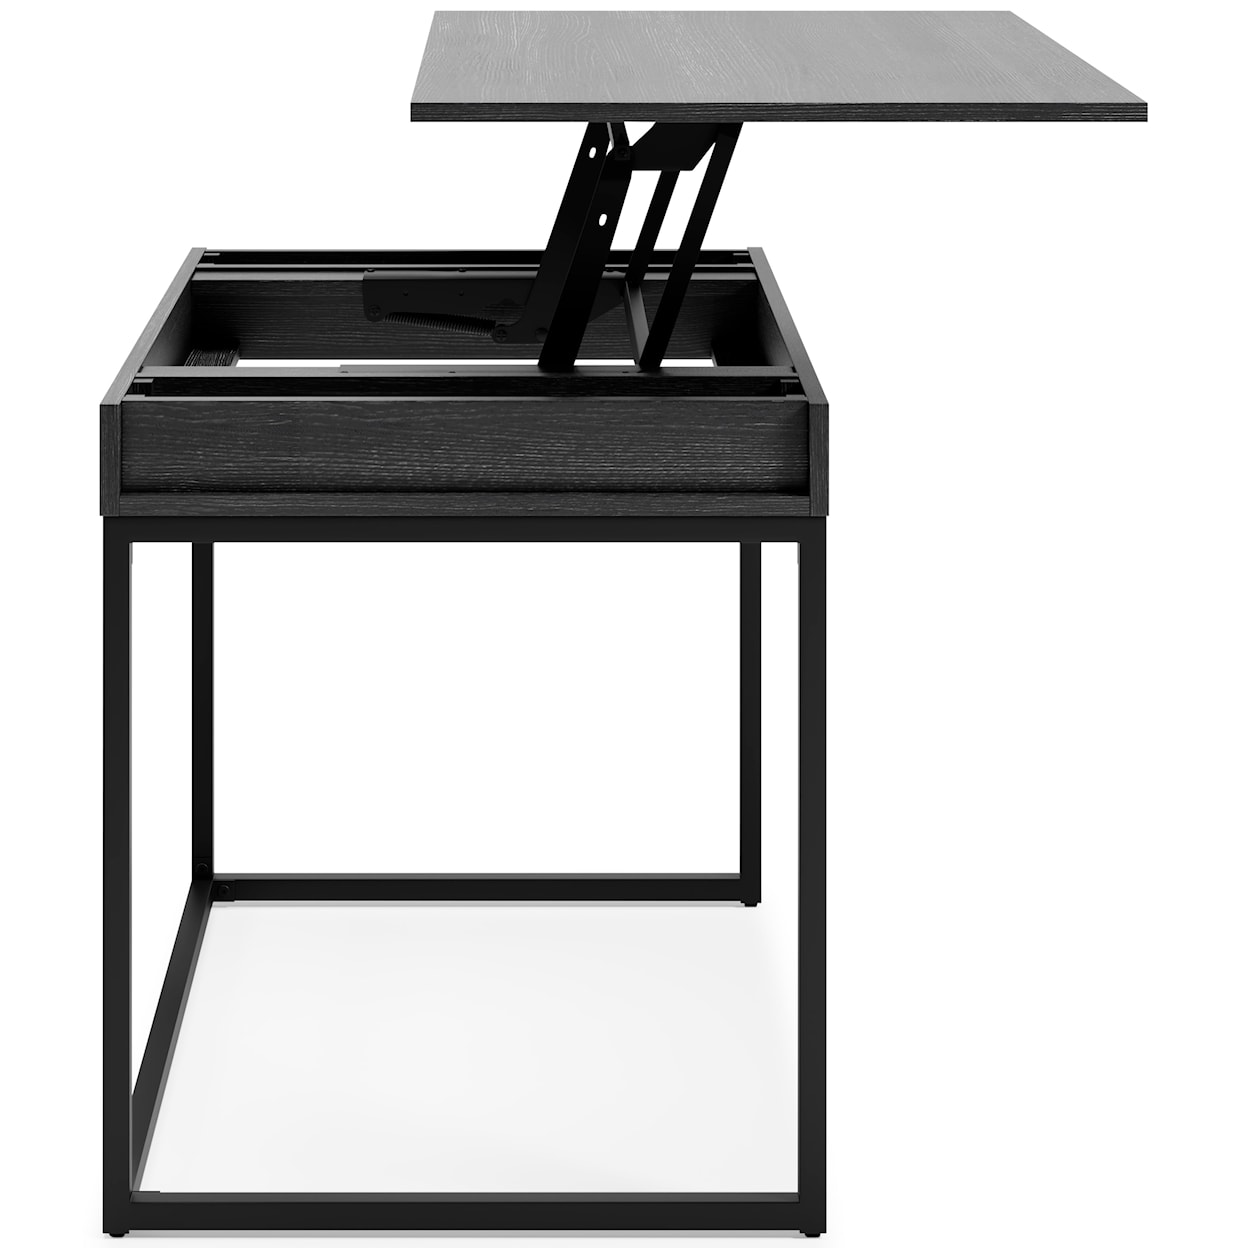 Benchcraft Yarlow 36" Home Office Lift-Top Desk